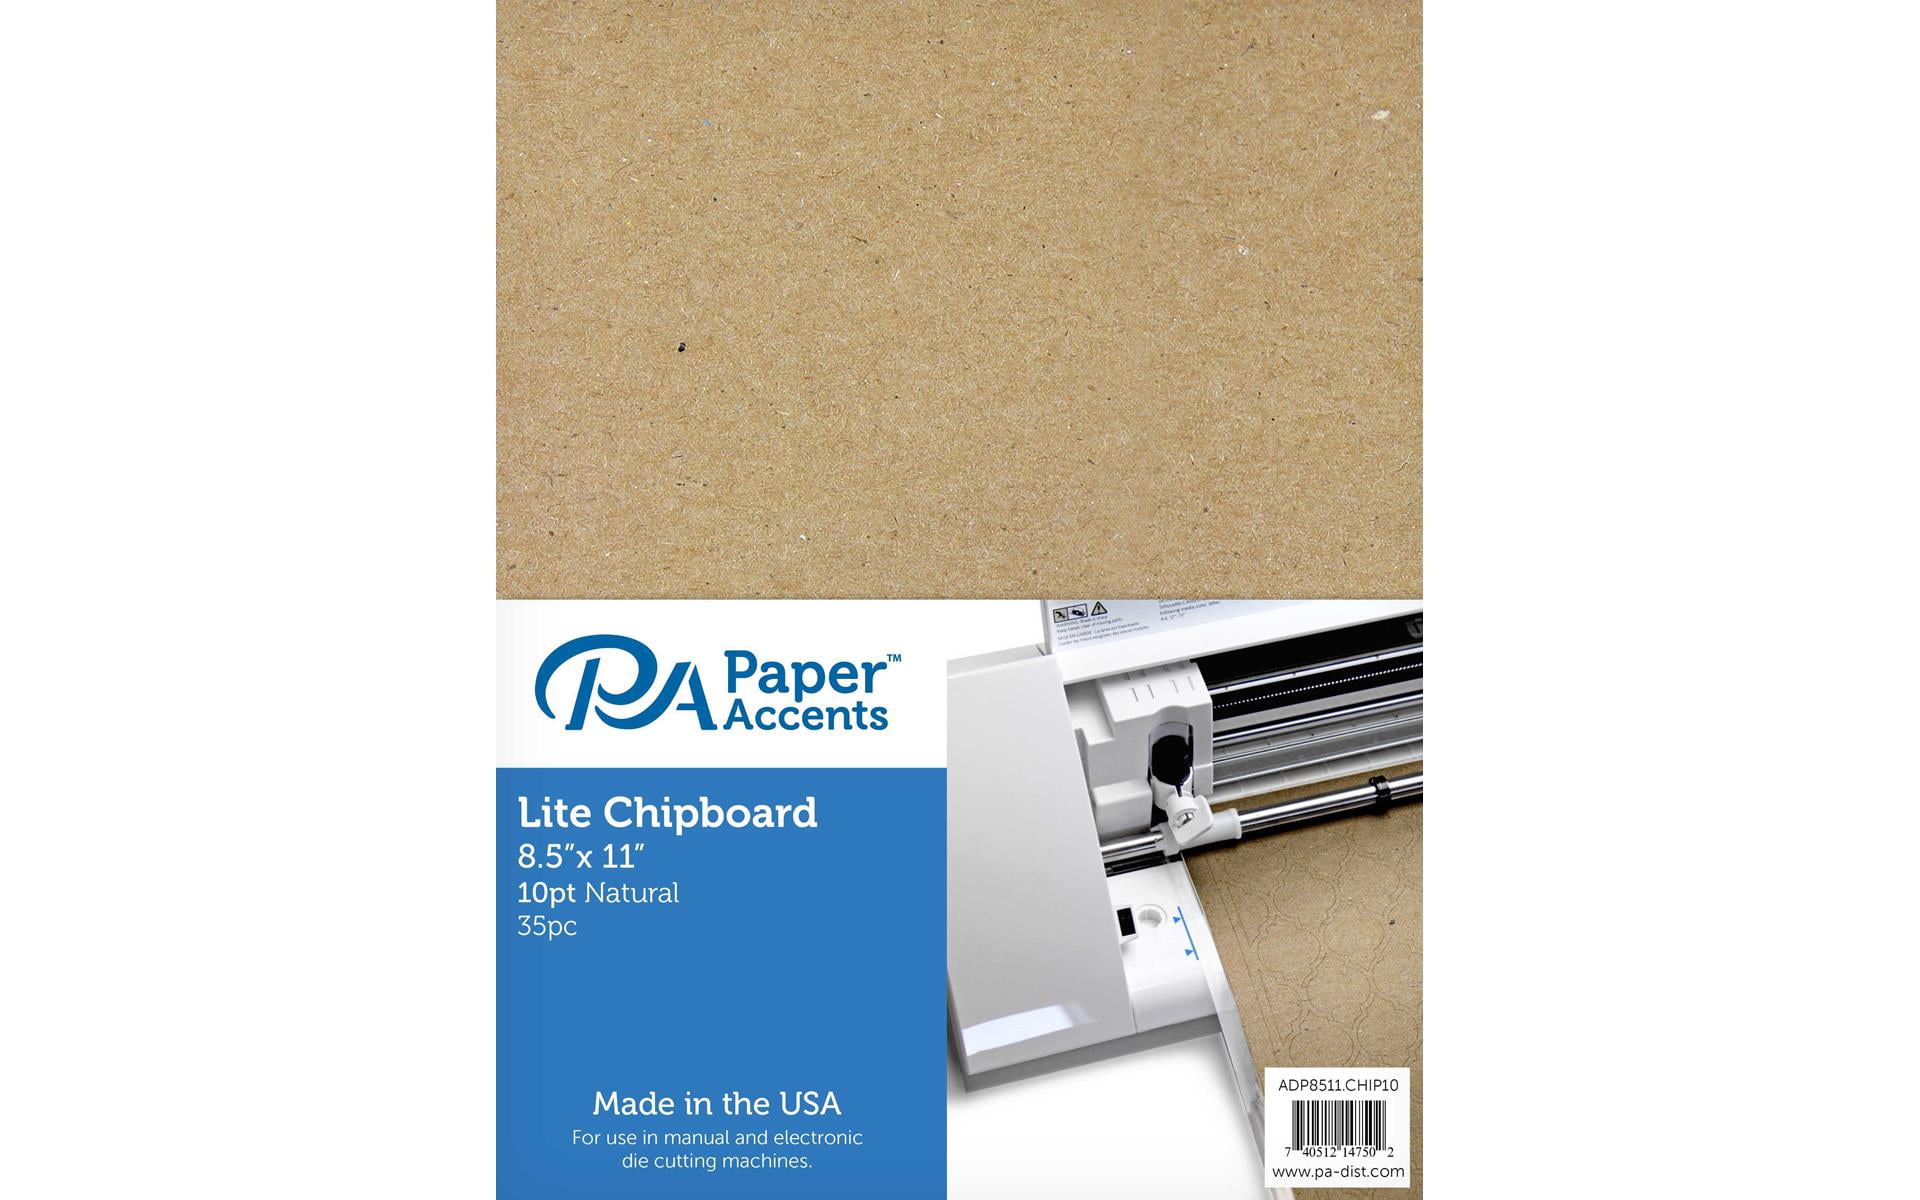 Paper Accents Chipboard 12 inchx 12 inch Thin 10pt 25pc Natural